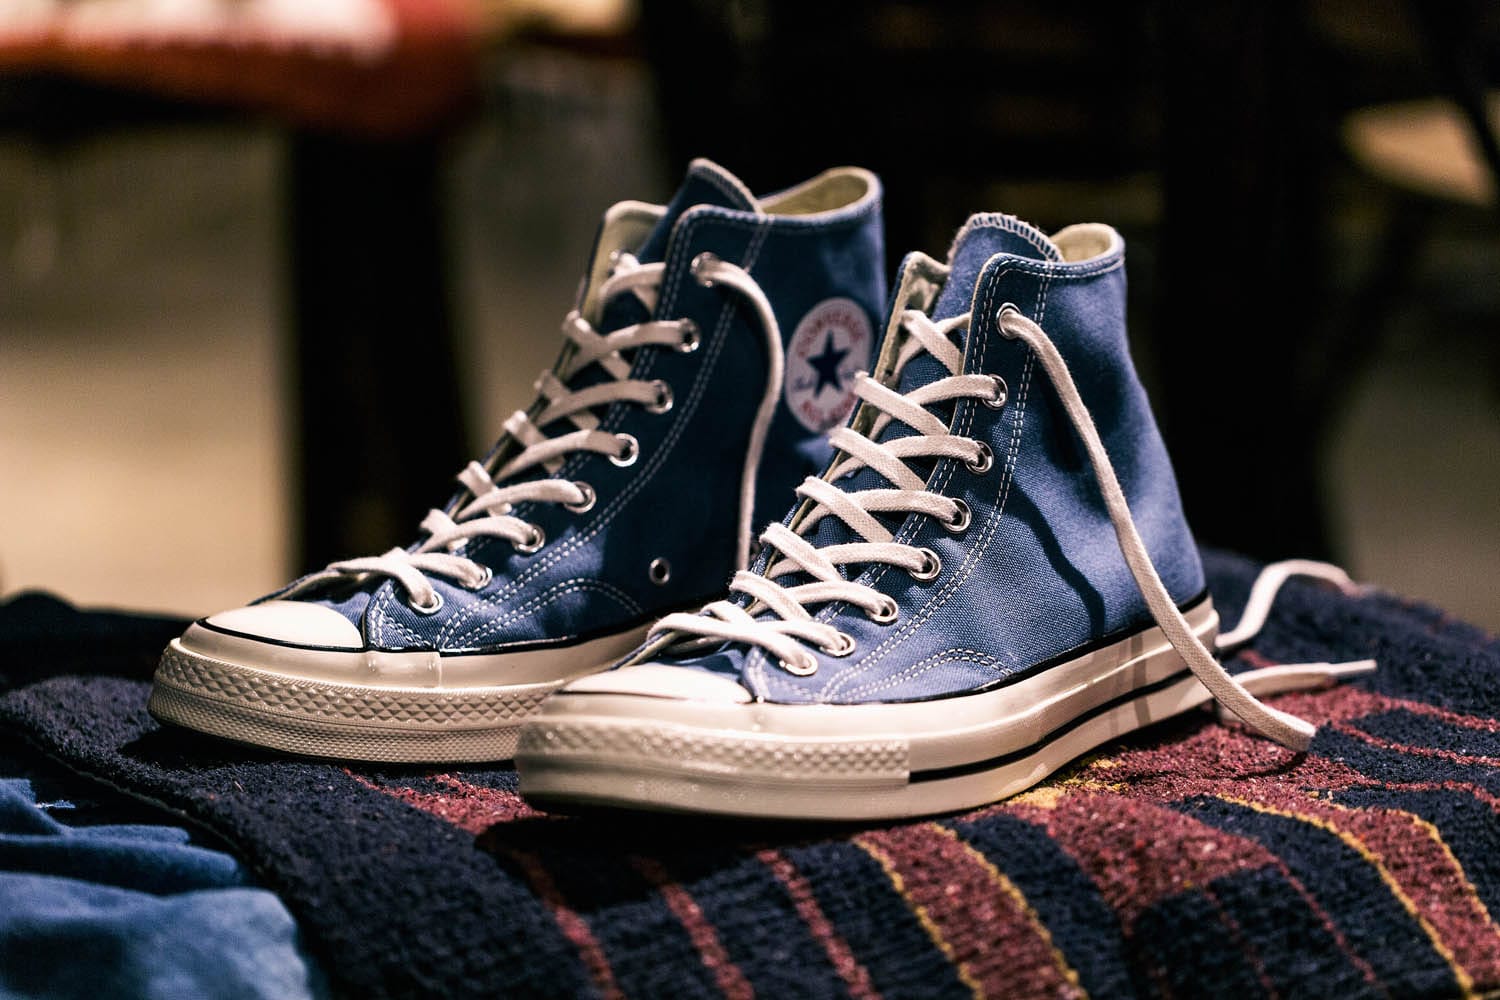 converse 2017 releases